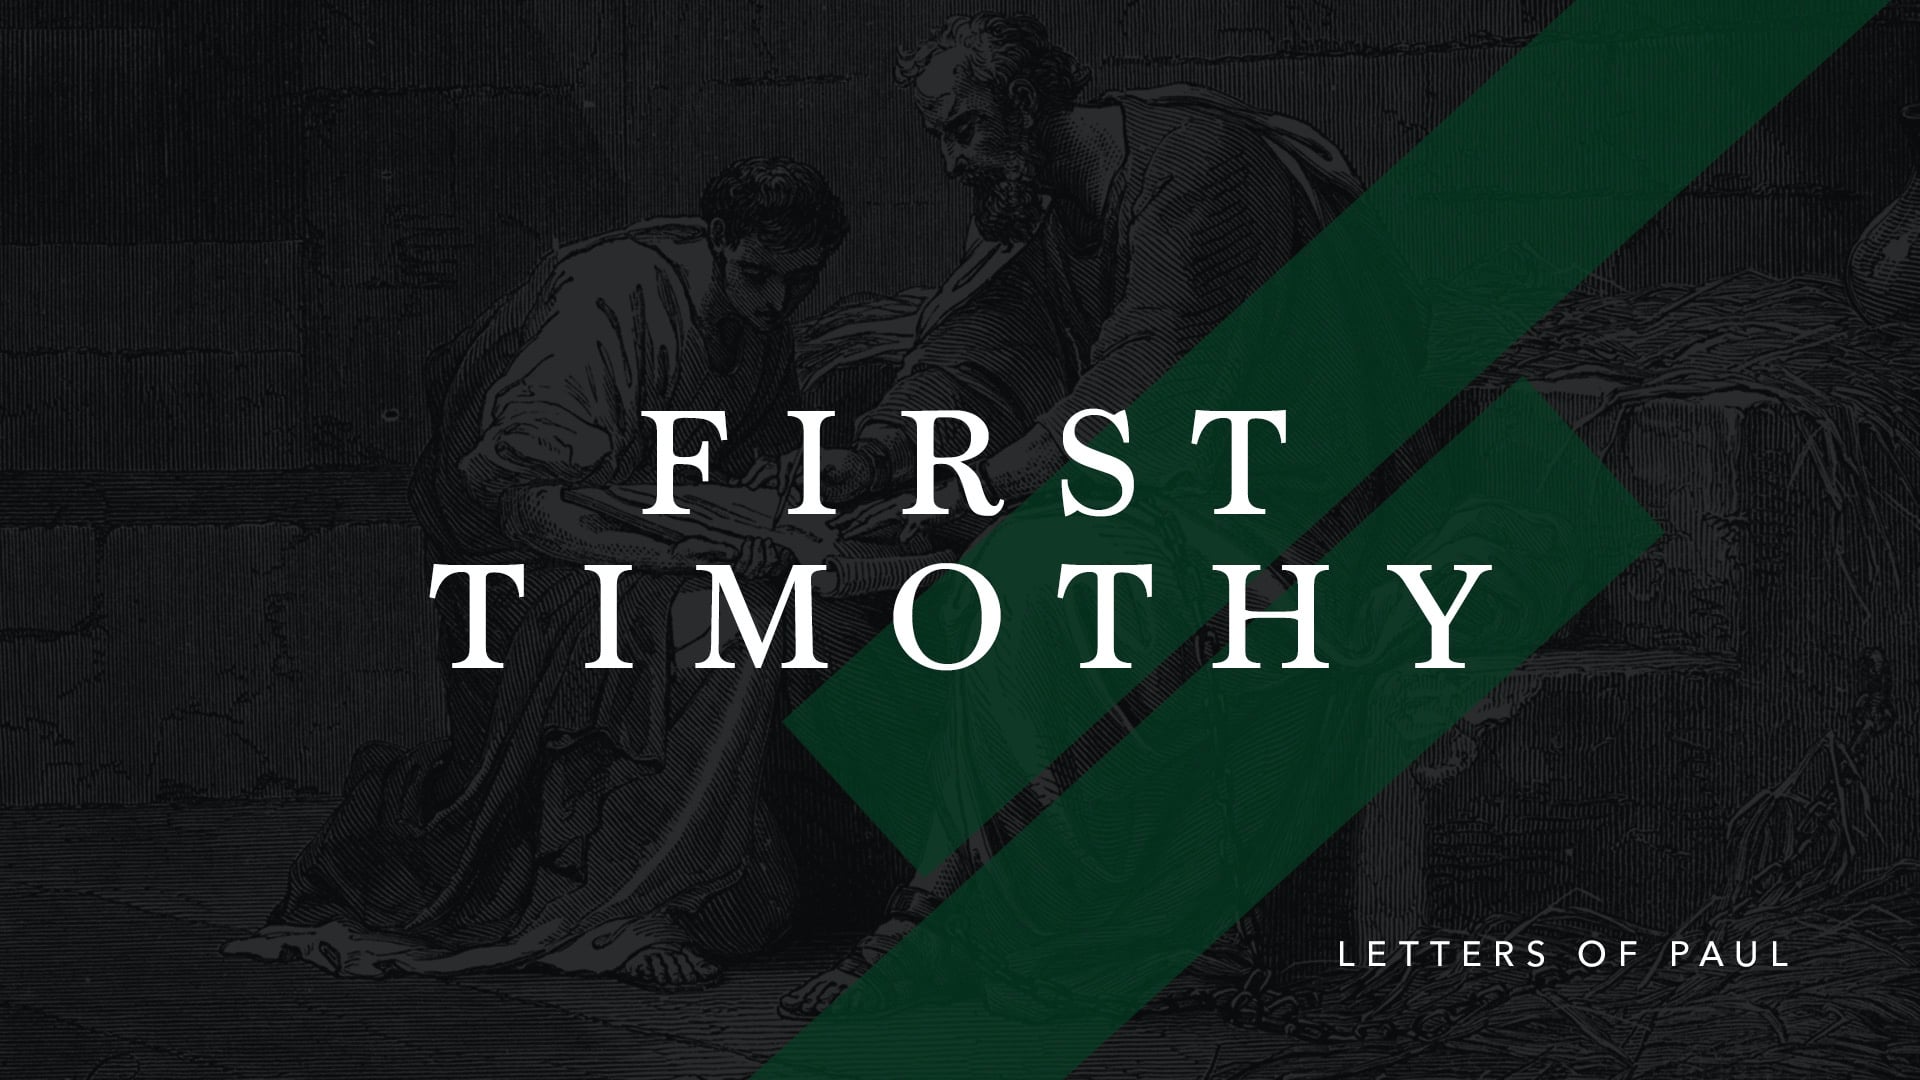 First Timothy: Women in Ministry (Part 3)